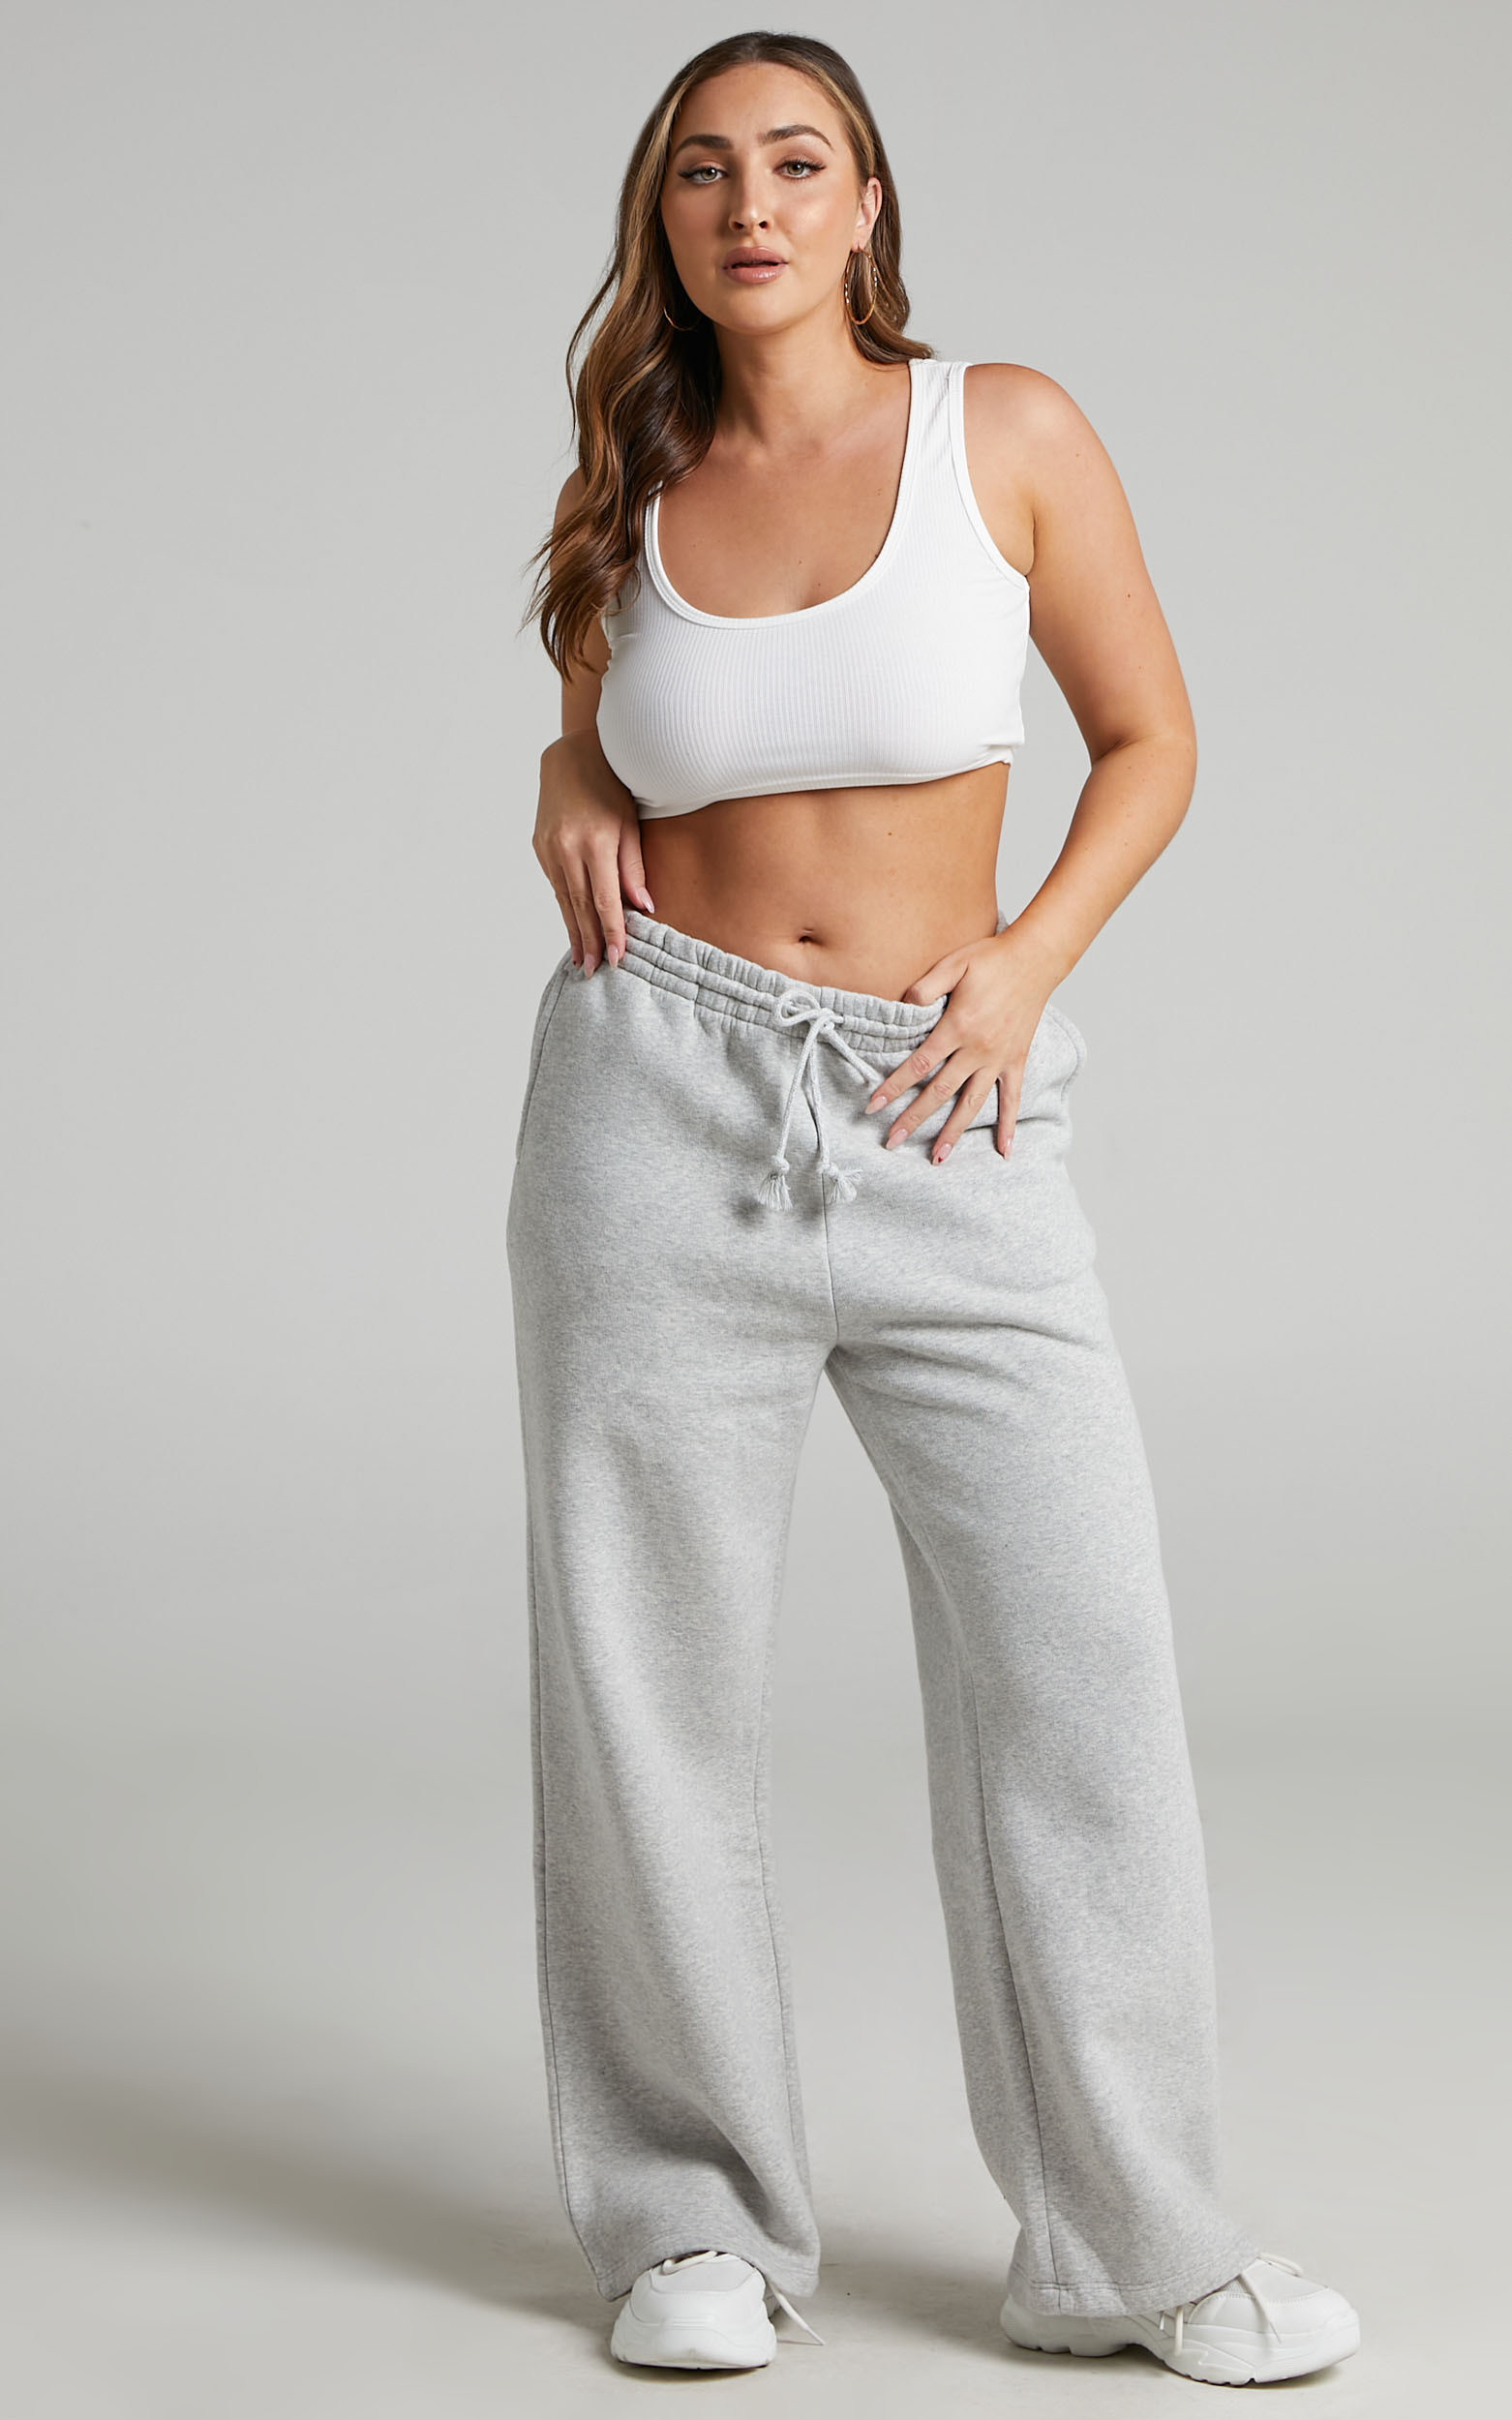 Levi's - Apartment Trackpants in Light Mist Heather - L, GRY1, hi-res image number null